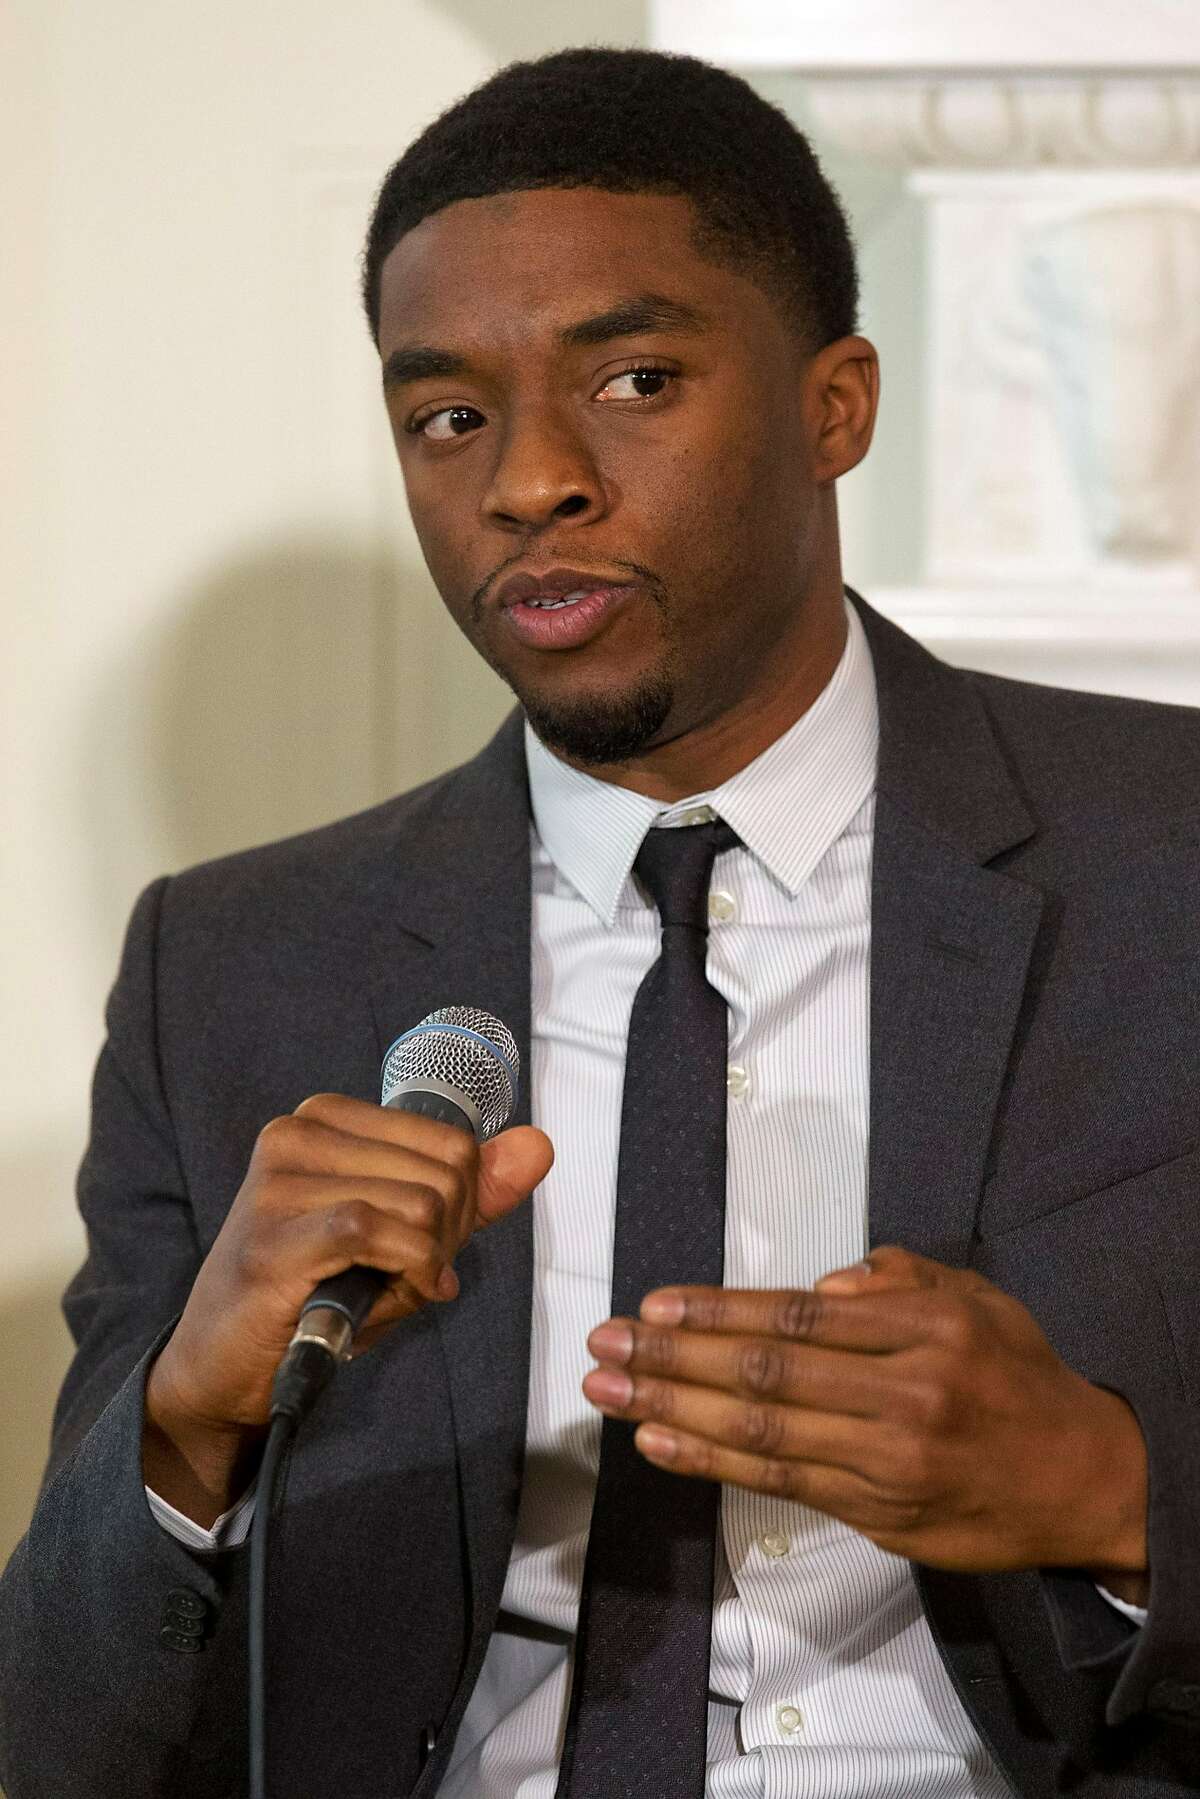 Actor Chadwick Boseman, who plays baseball great Jackie Robinson in the movie "42" speaks on a panel, hosted by first lady Michelle Obama, of the cast and crew of the movie, Tuesday, April 2, 2013, in the State Dining Room of the White House in Washington.